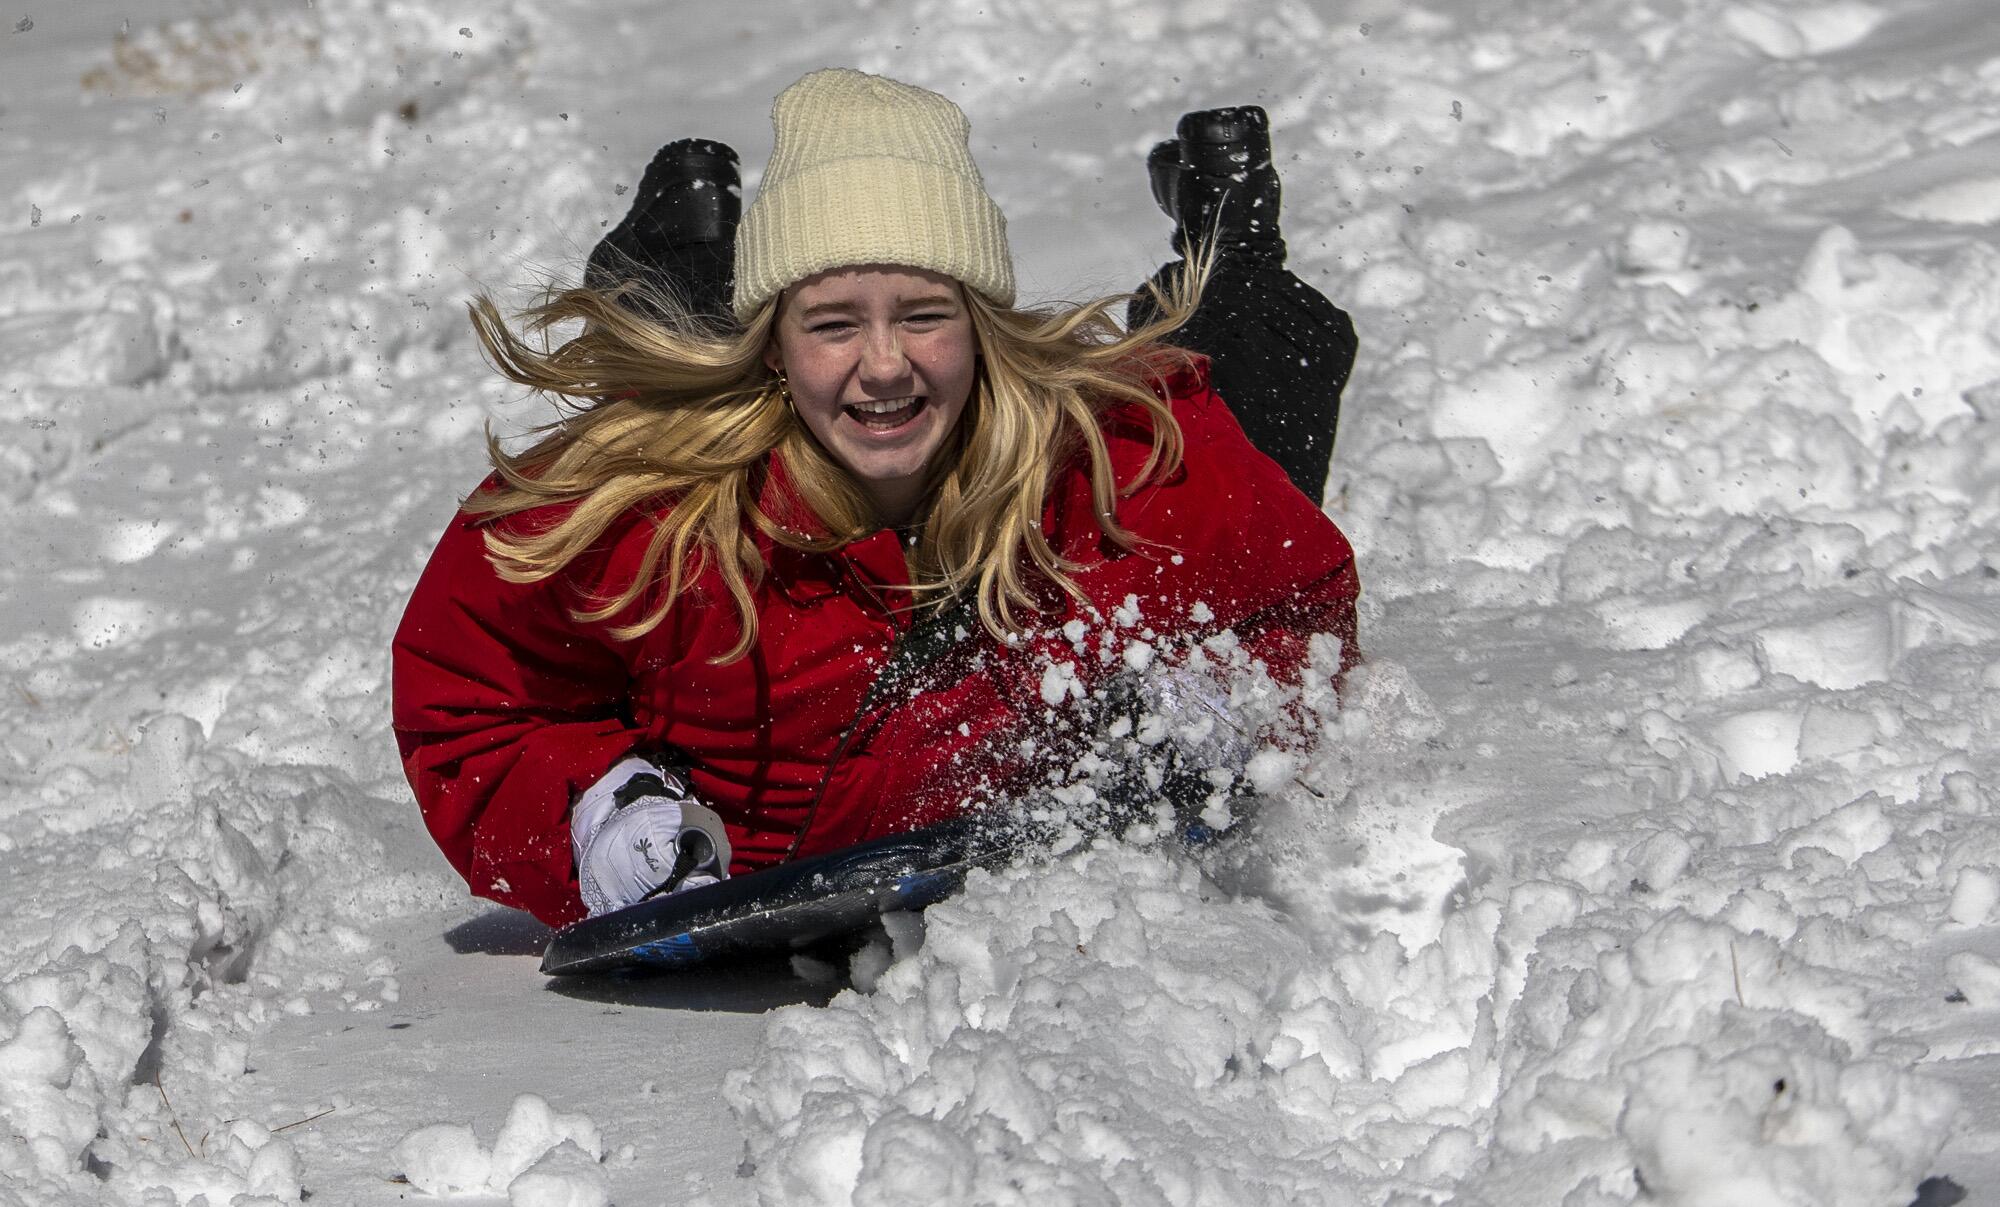 Tina Lewis sleds belly down in fresh snow with her hair flying.